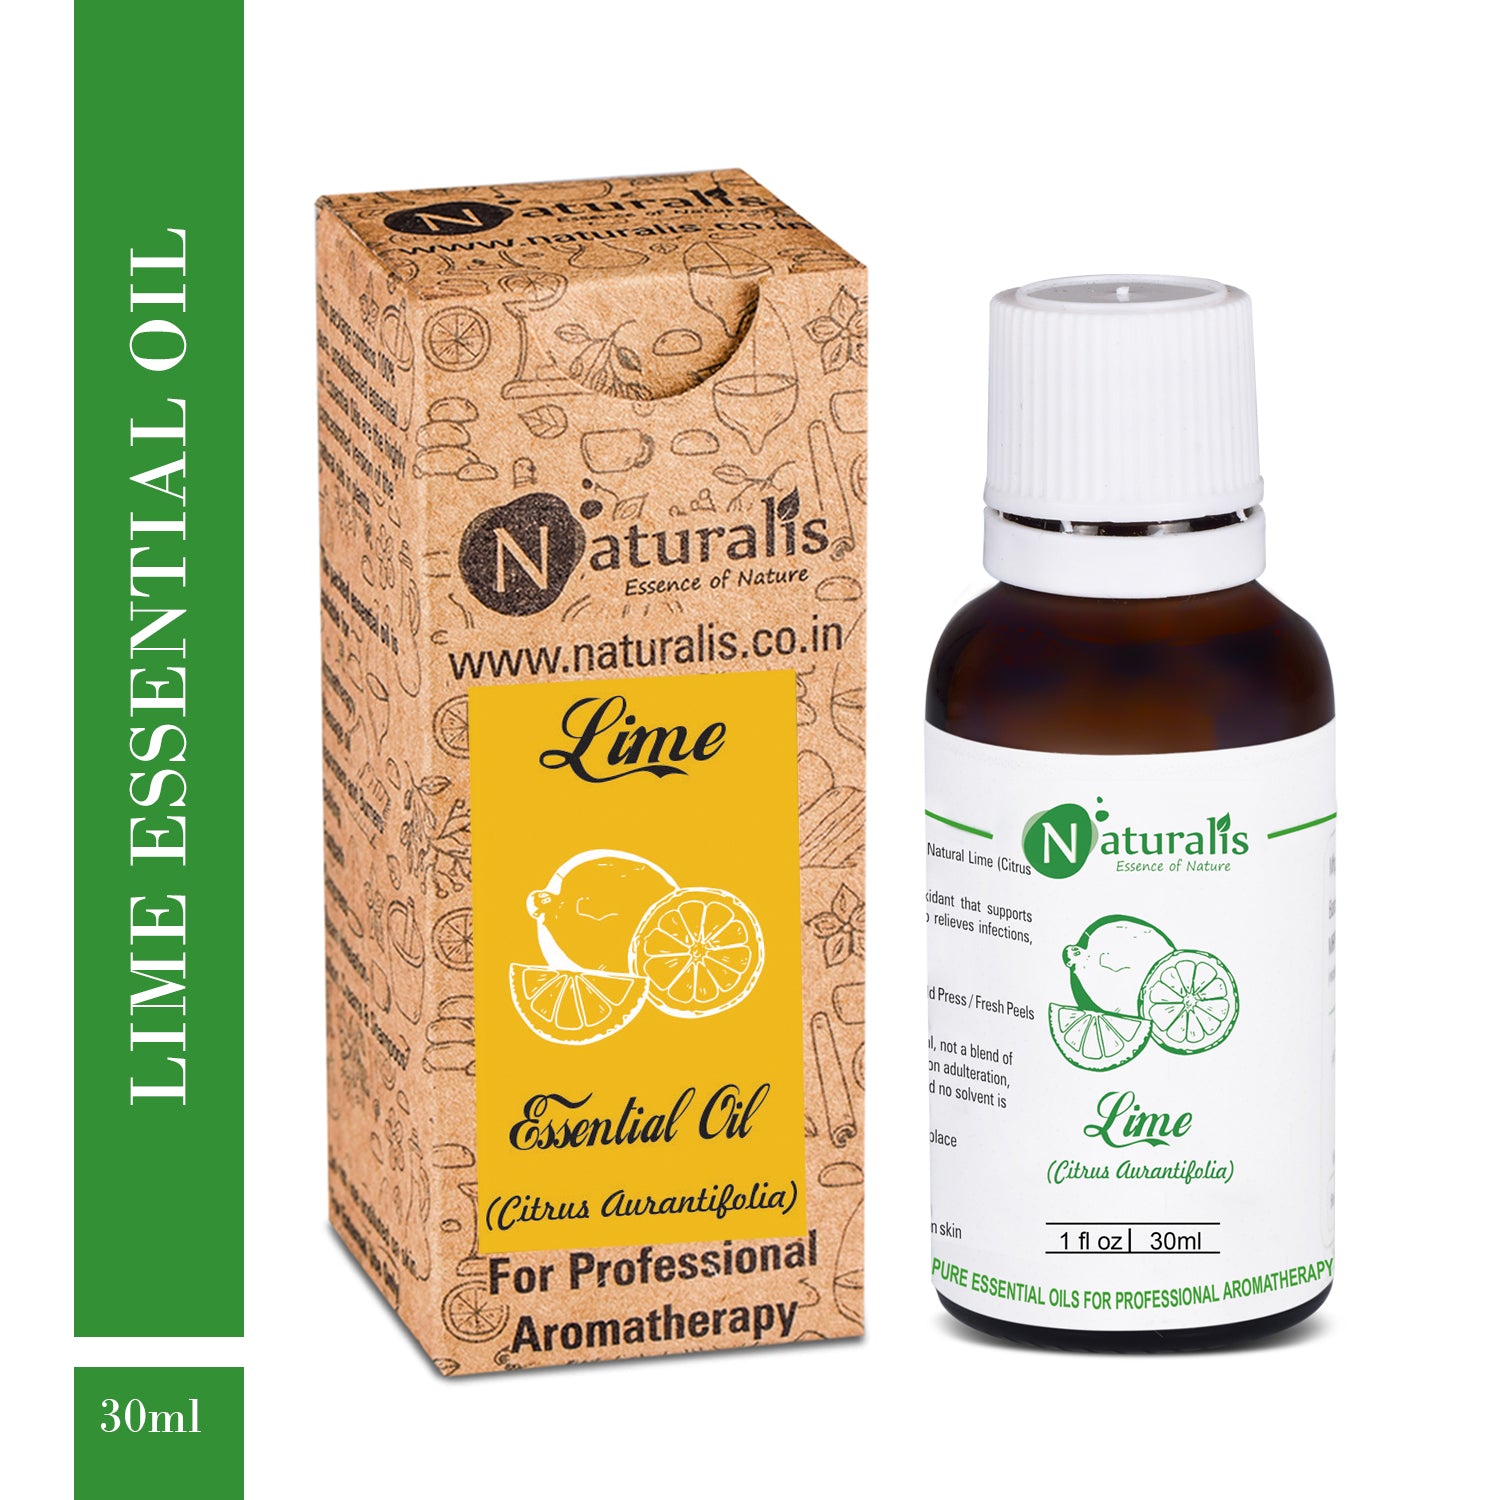 Lime Essential Oil by Naturalis - Pure & Natural - Naturalis